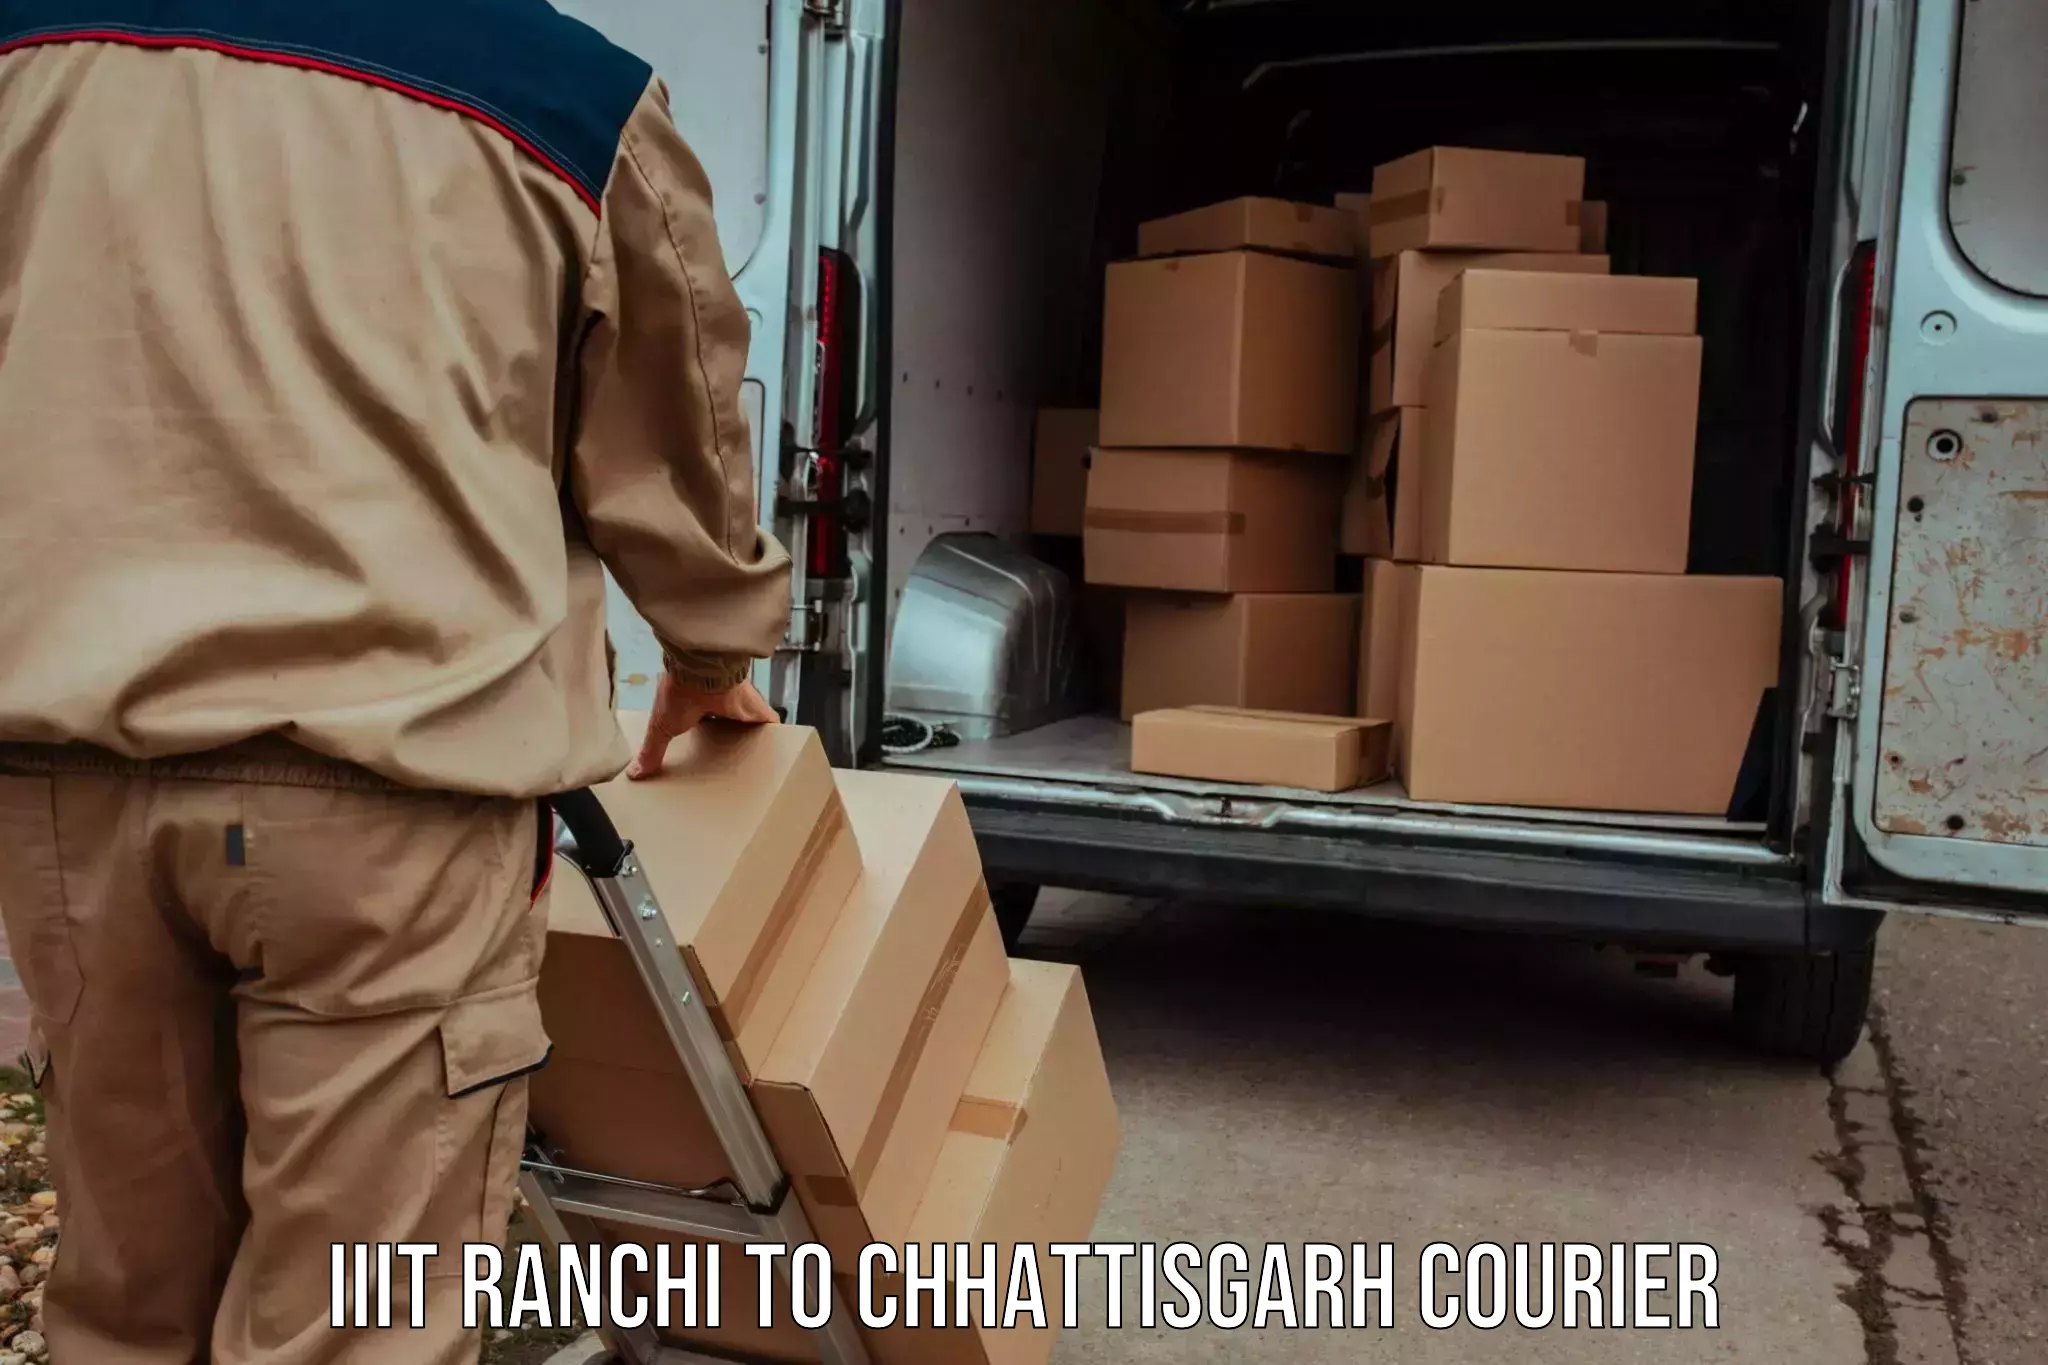 Residential courier service IIIT Ranchi to Raigarh